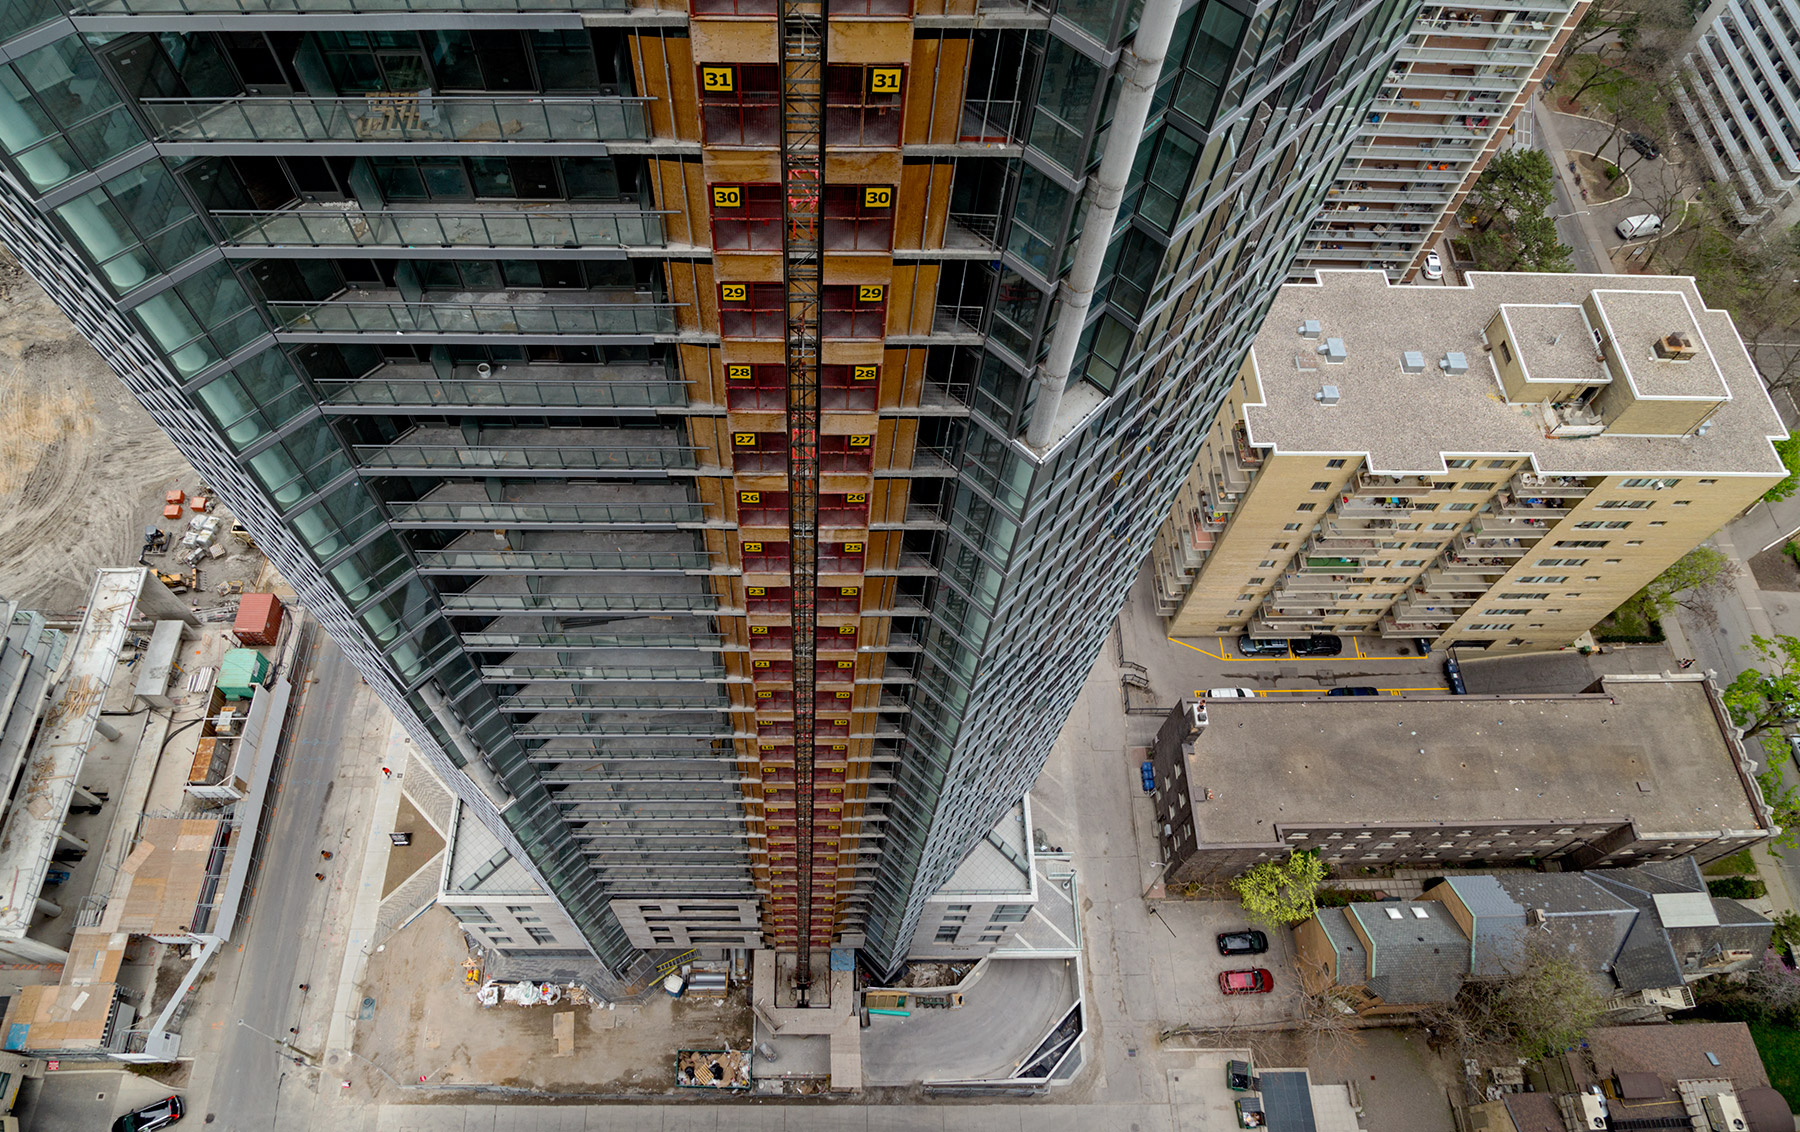 20150528. Construction of the Chaz Condos nears completion creat